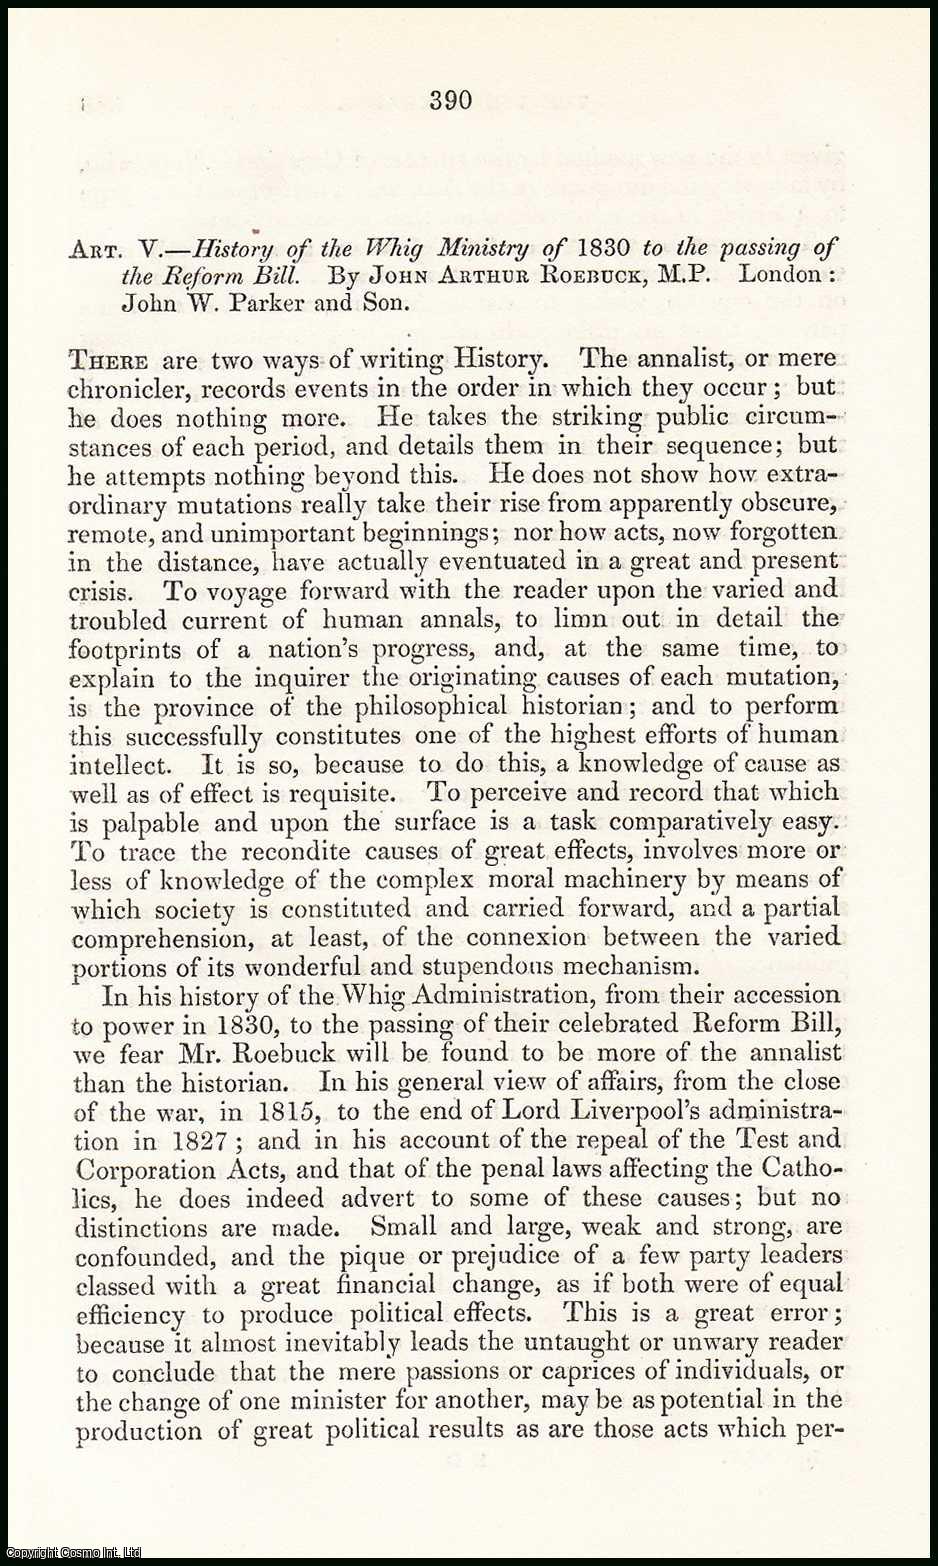 Author Unknown - The History of the Whig Ministry of 1830 to the Passing of the Reform Bill. By John Arthur Roebuck, M.P. A rare original article from the British Quarterly Review, 1852.